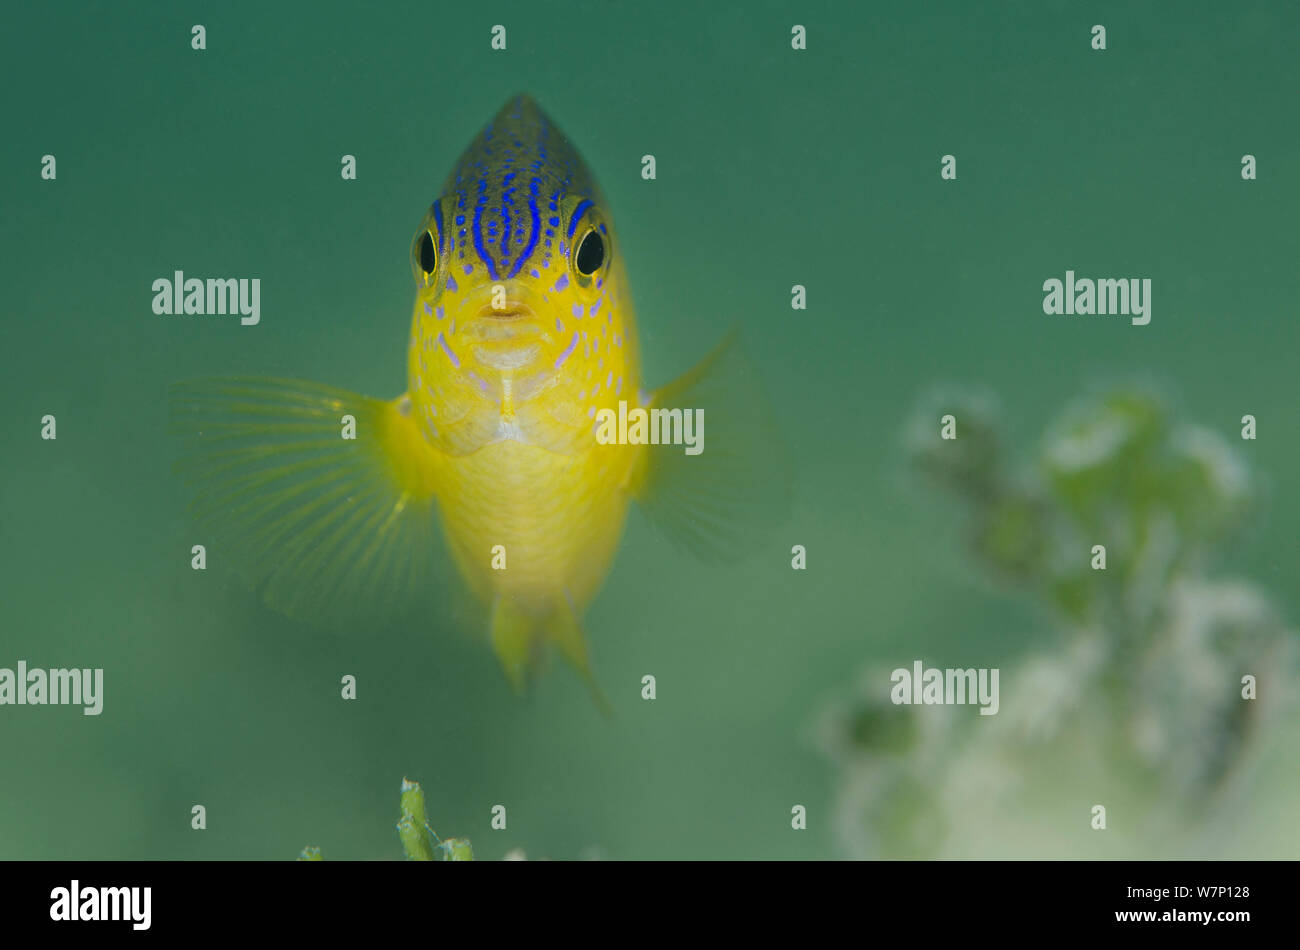 Portrait of a Beaugregory fish (Stegastes leucostictus) in shallow water, East End, Grand Cayman, Cayman Islands, British West Indies, Caribbean Sea. Stock Photo